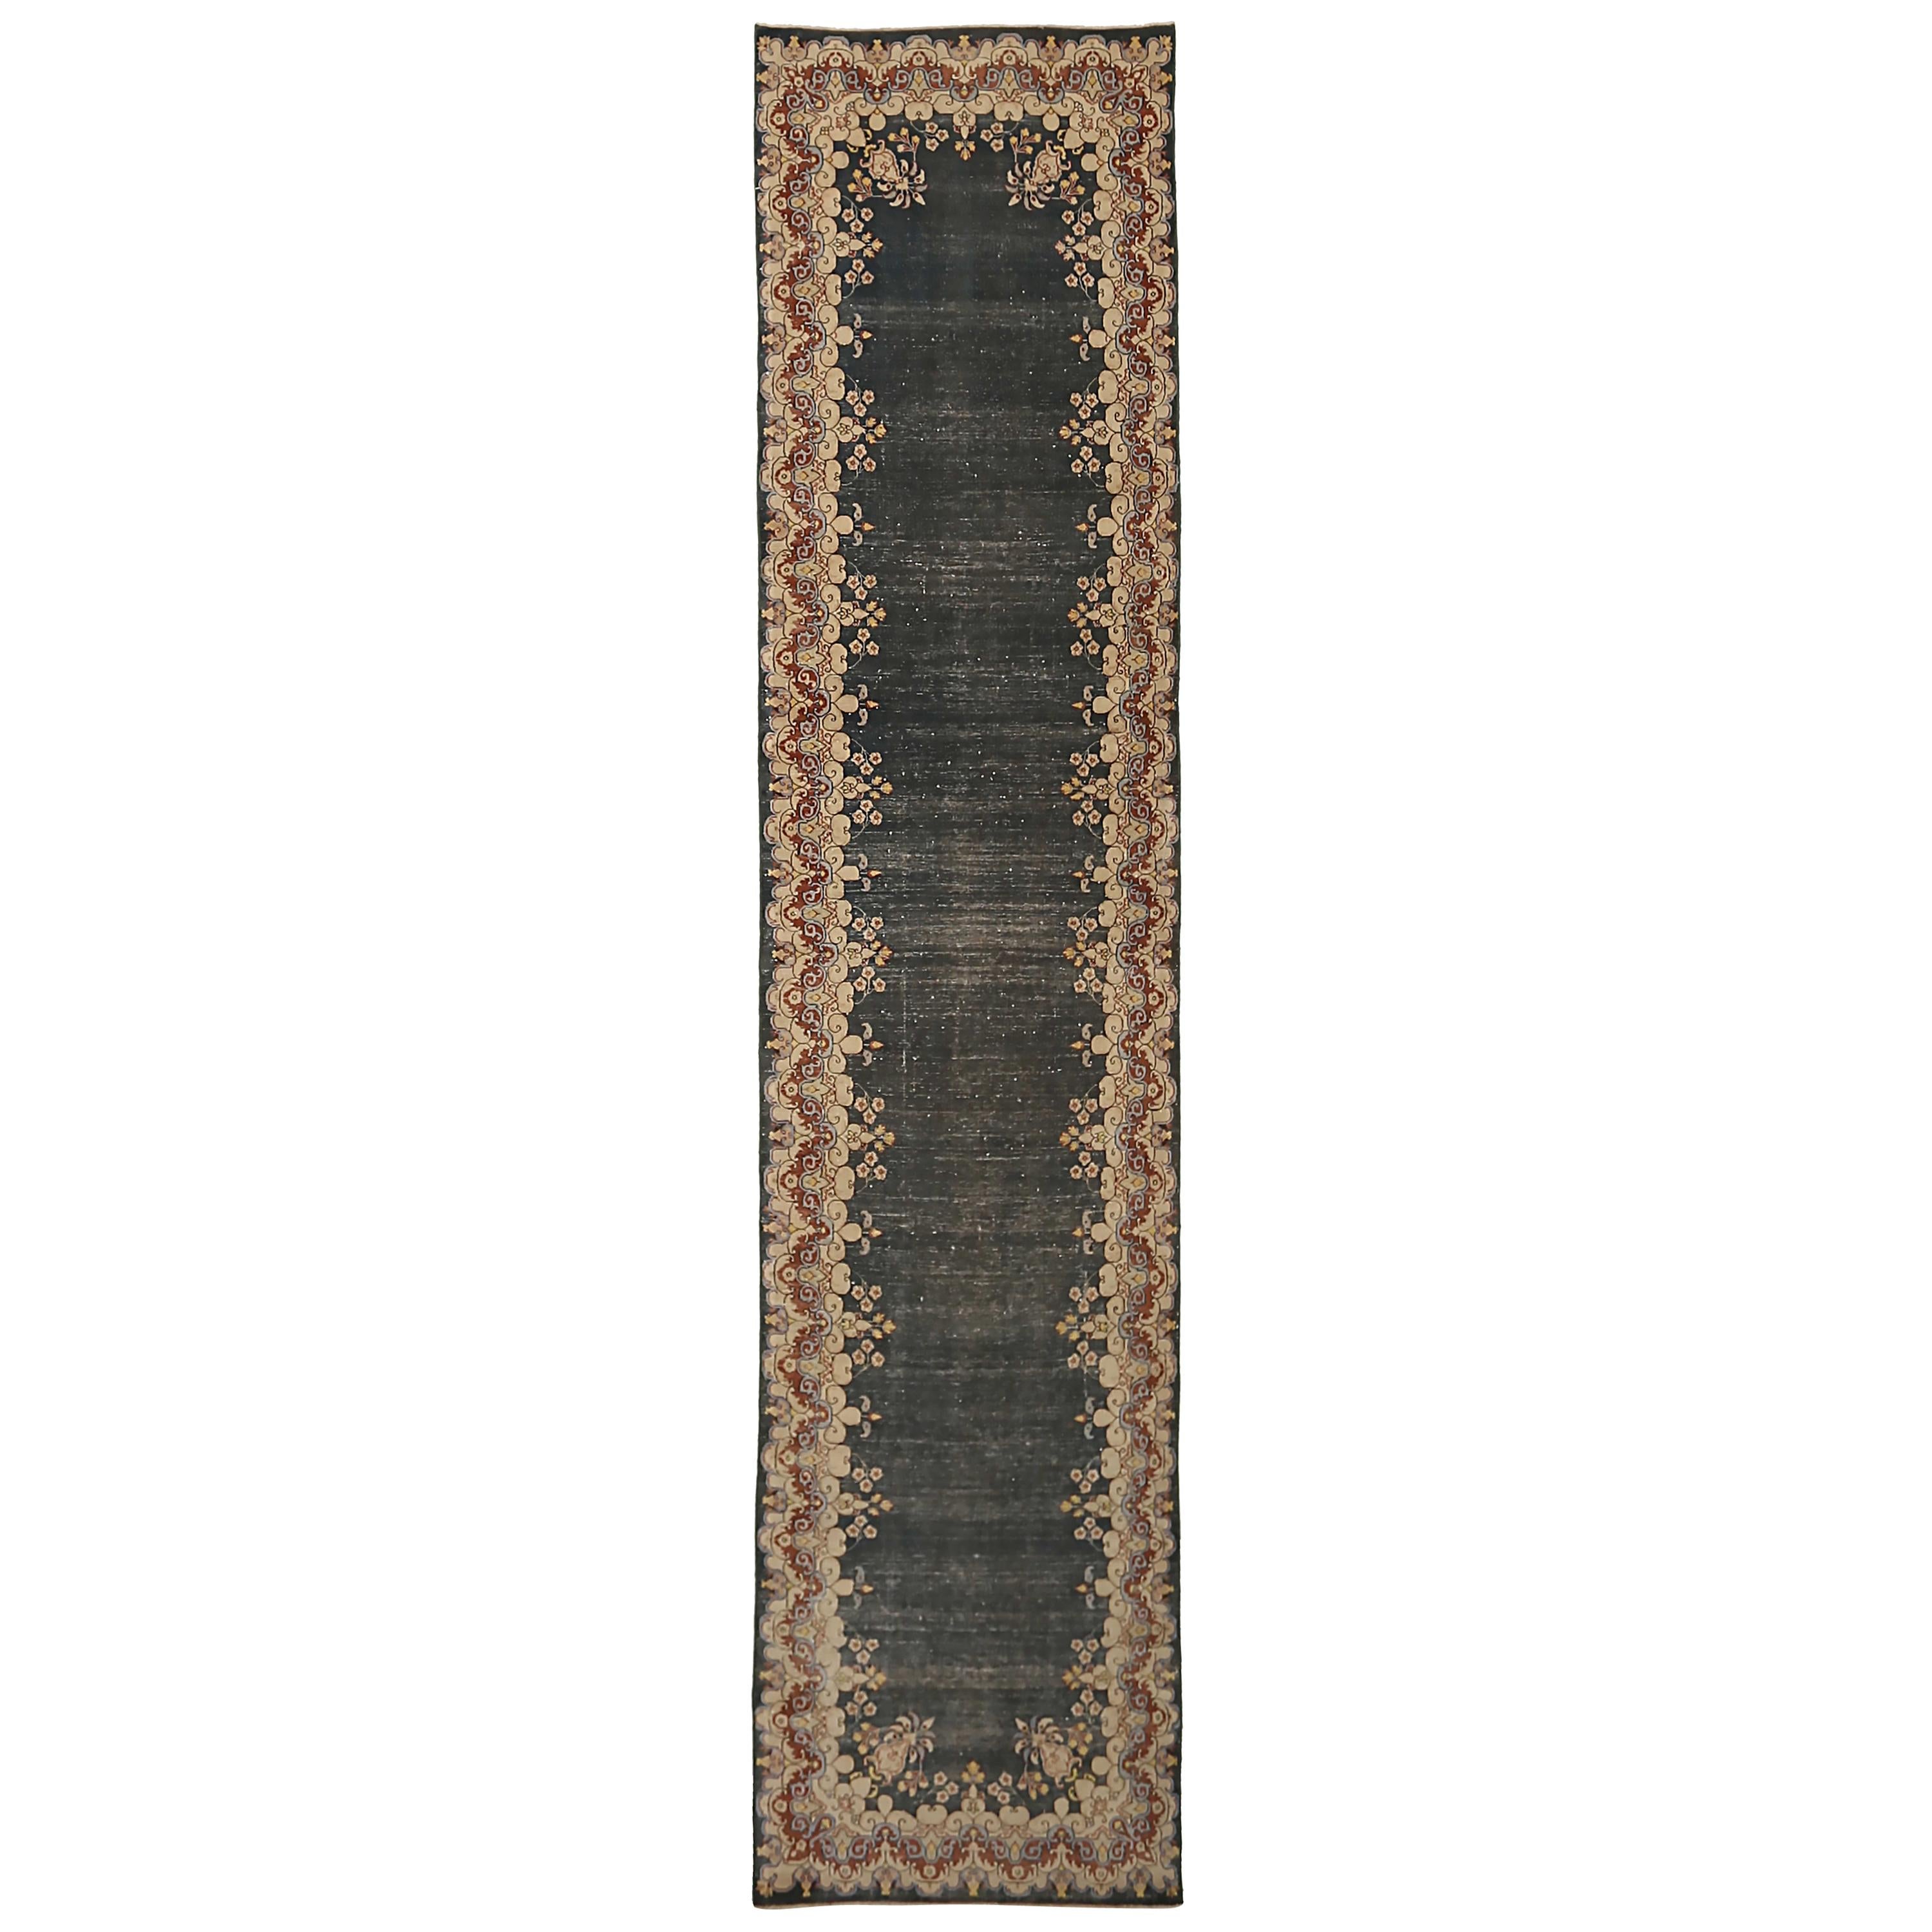 Antique Persian runner rug handwoven from the finest sheep’s wool. It’s colored with all-natural vegetable dyes that are safe for humans and pets. It’s a traditional Kerman design handwoven by expert artisans. It’s a lovely runner rug that can be